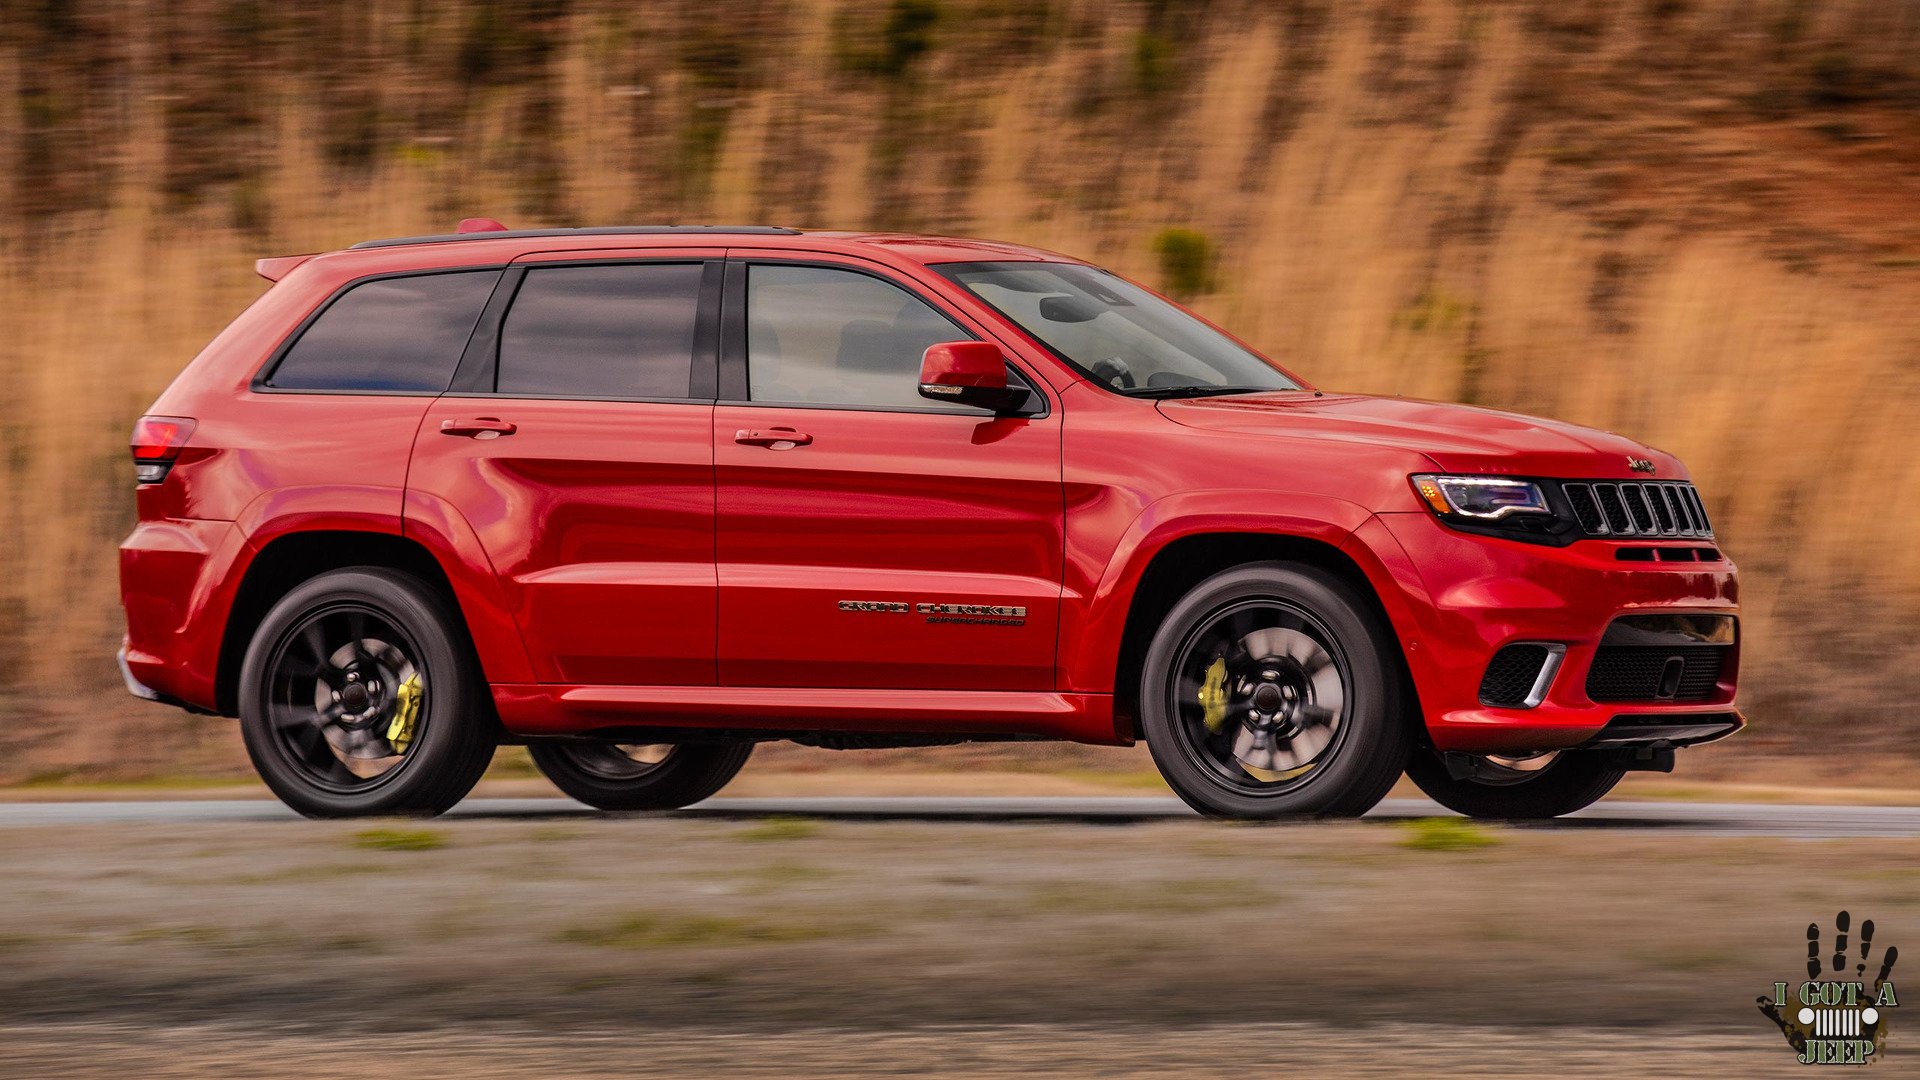 2018 Jeep Trackhawk ready for the track.